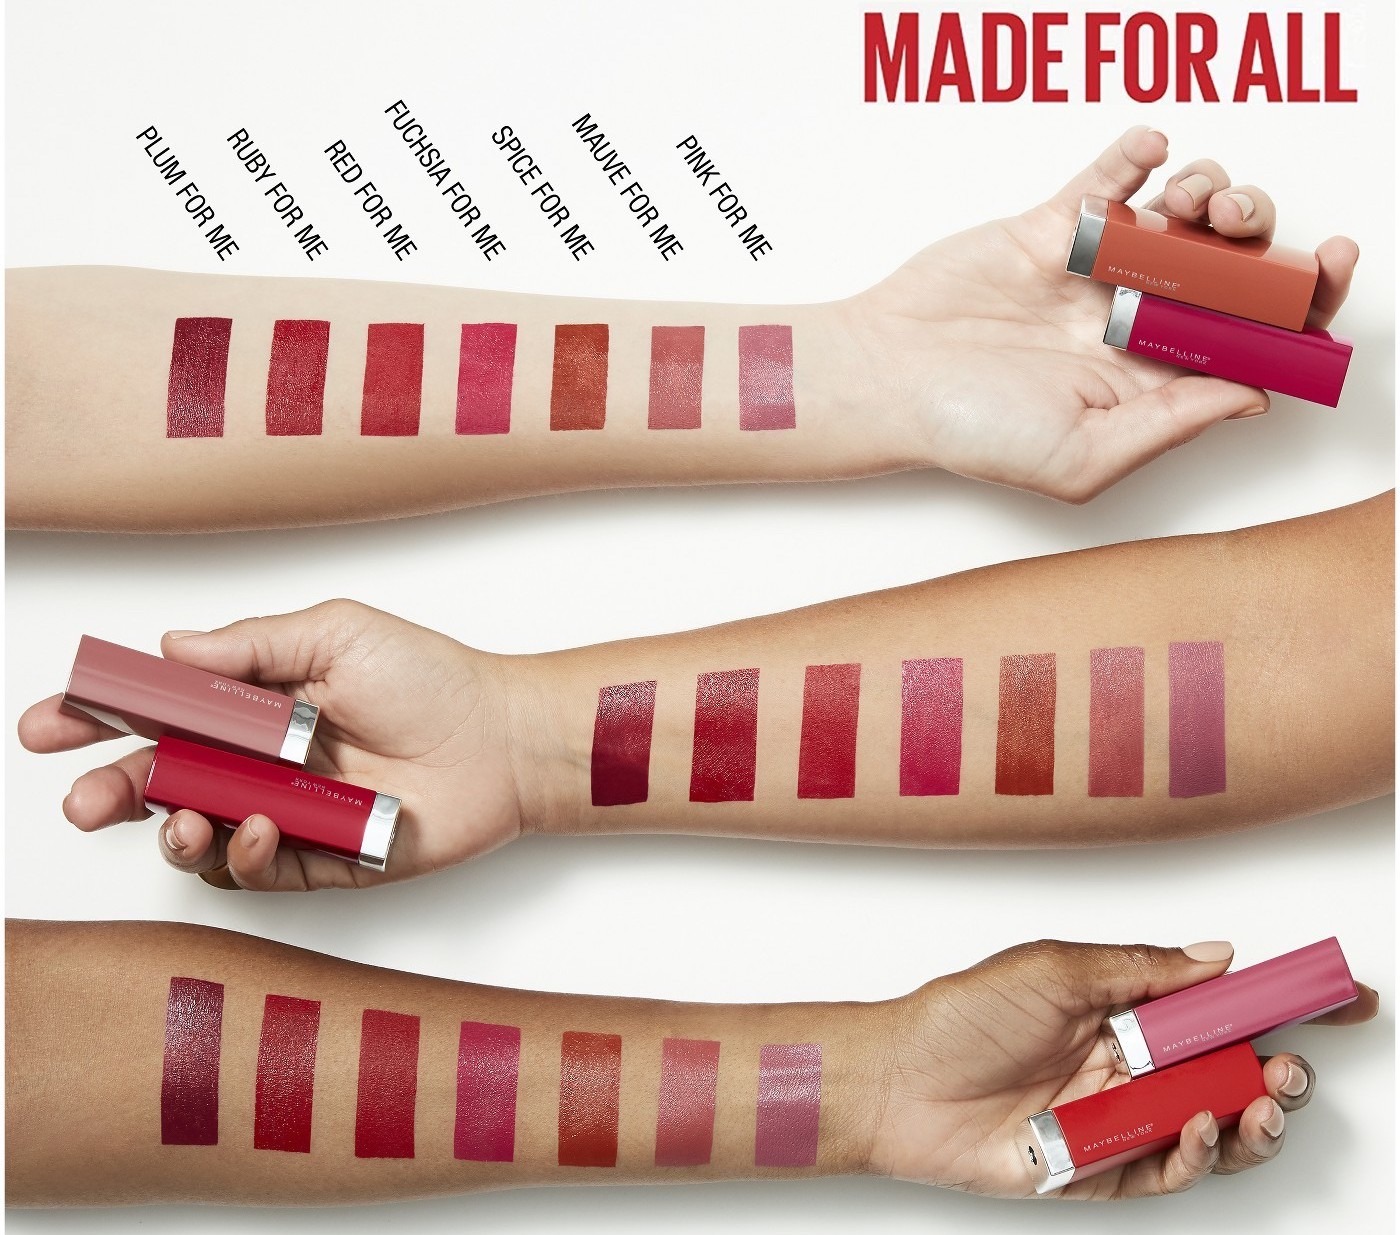 Maybelline Made For All Lipsticks swatches